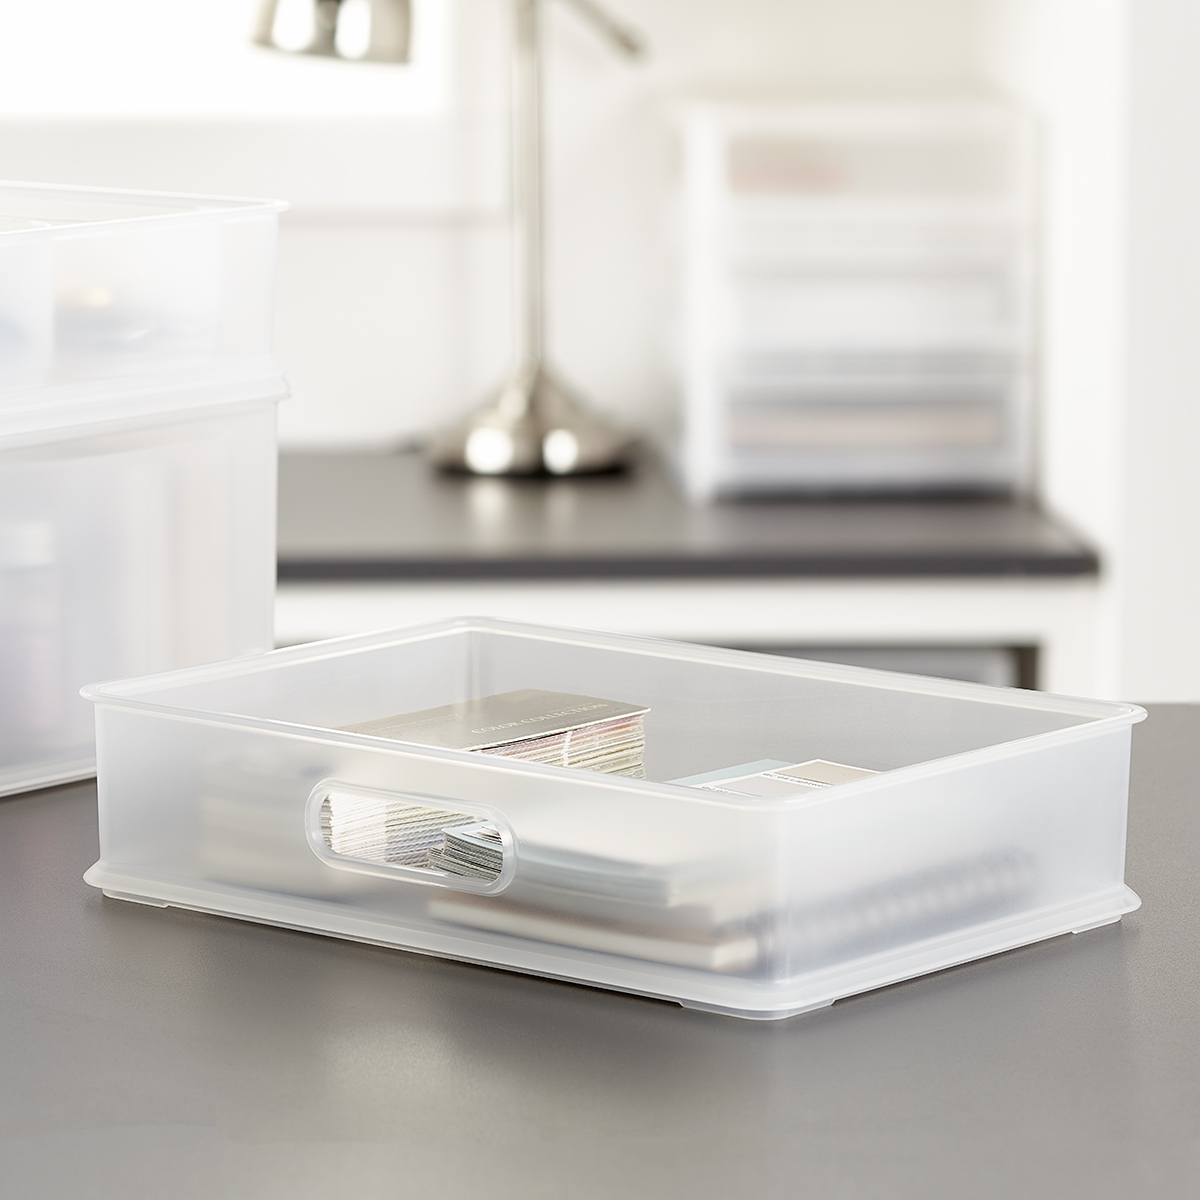 https://www.containerstore.com/catalogimages/434722/10080897_Shimo_storage_bin_small_sha.jpg